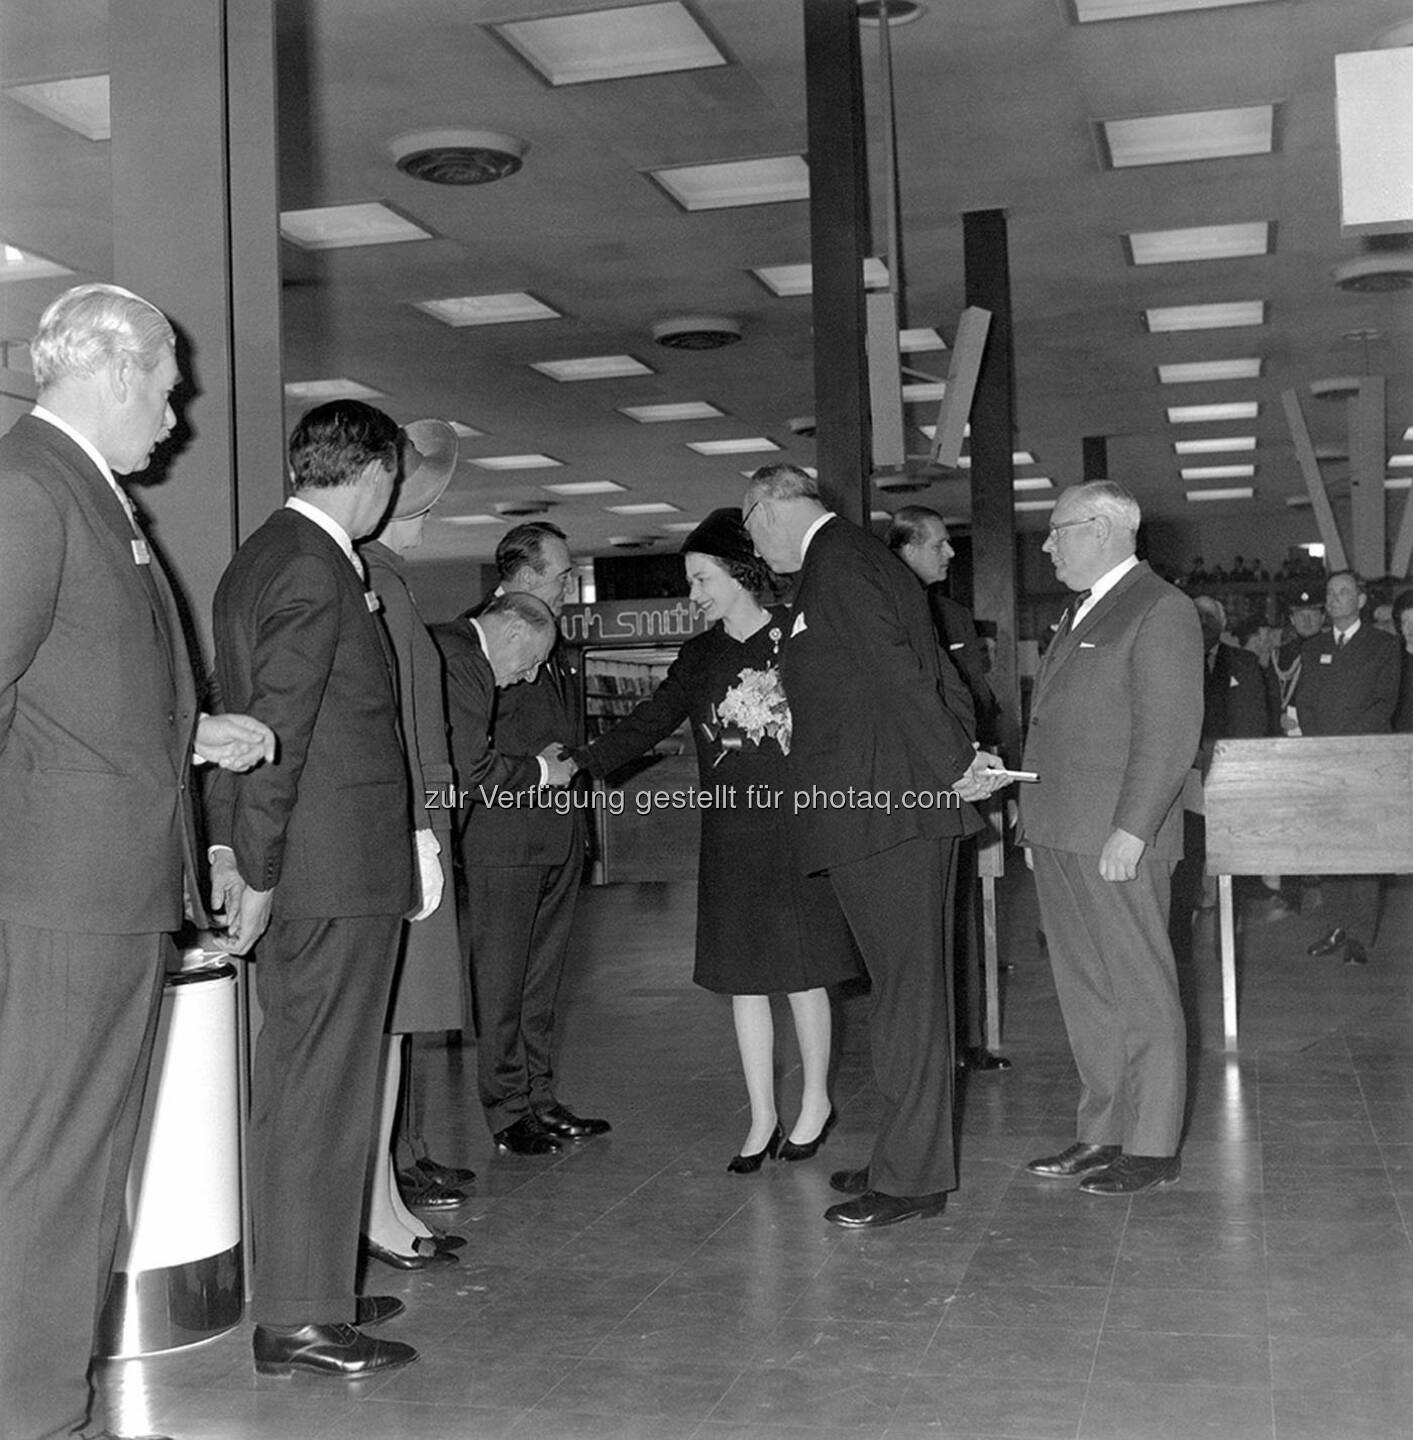 Heathrow Airport, Her Majesty The Queen formally opens Terminal 1, 1969. Image ref XHHE00070, orphan works (c) Aussendung Austrian